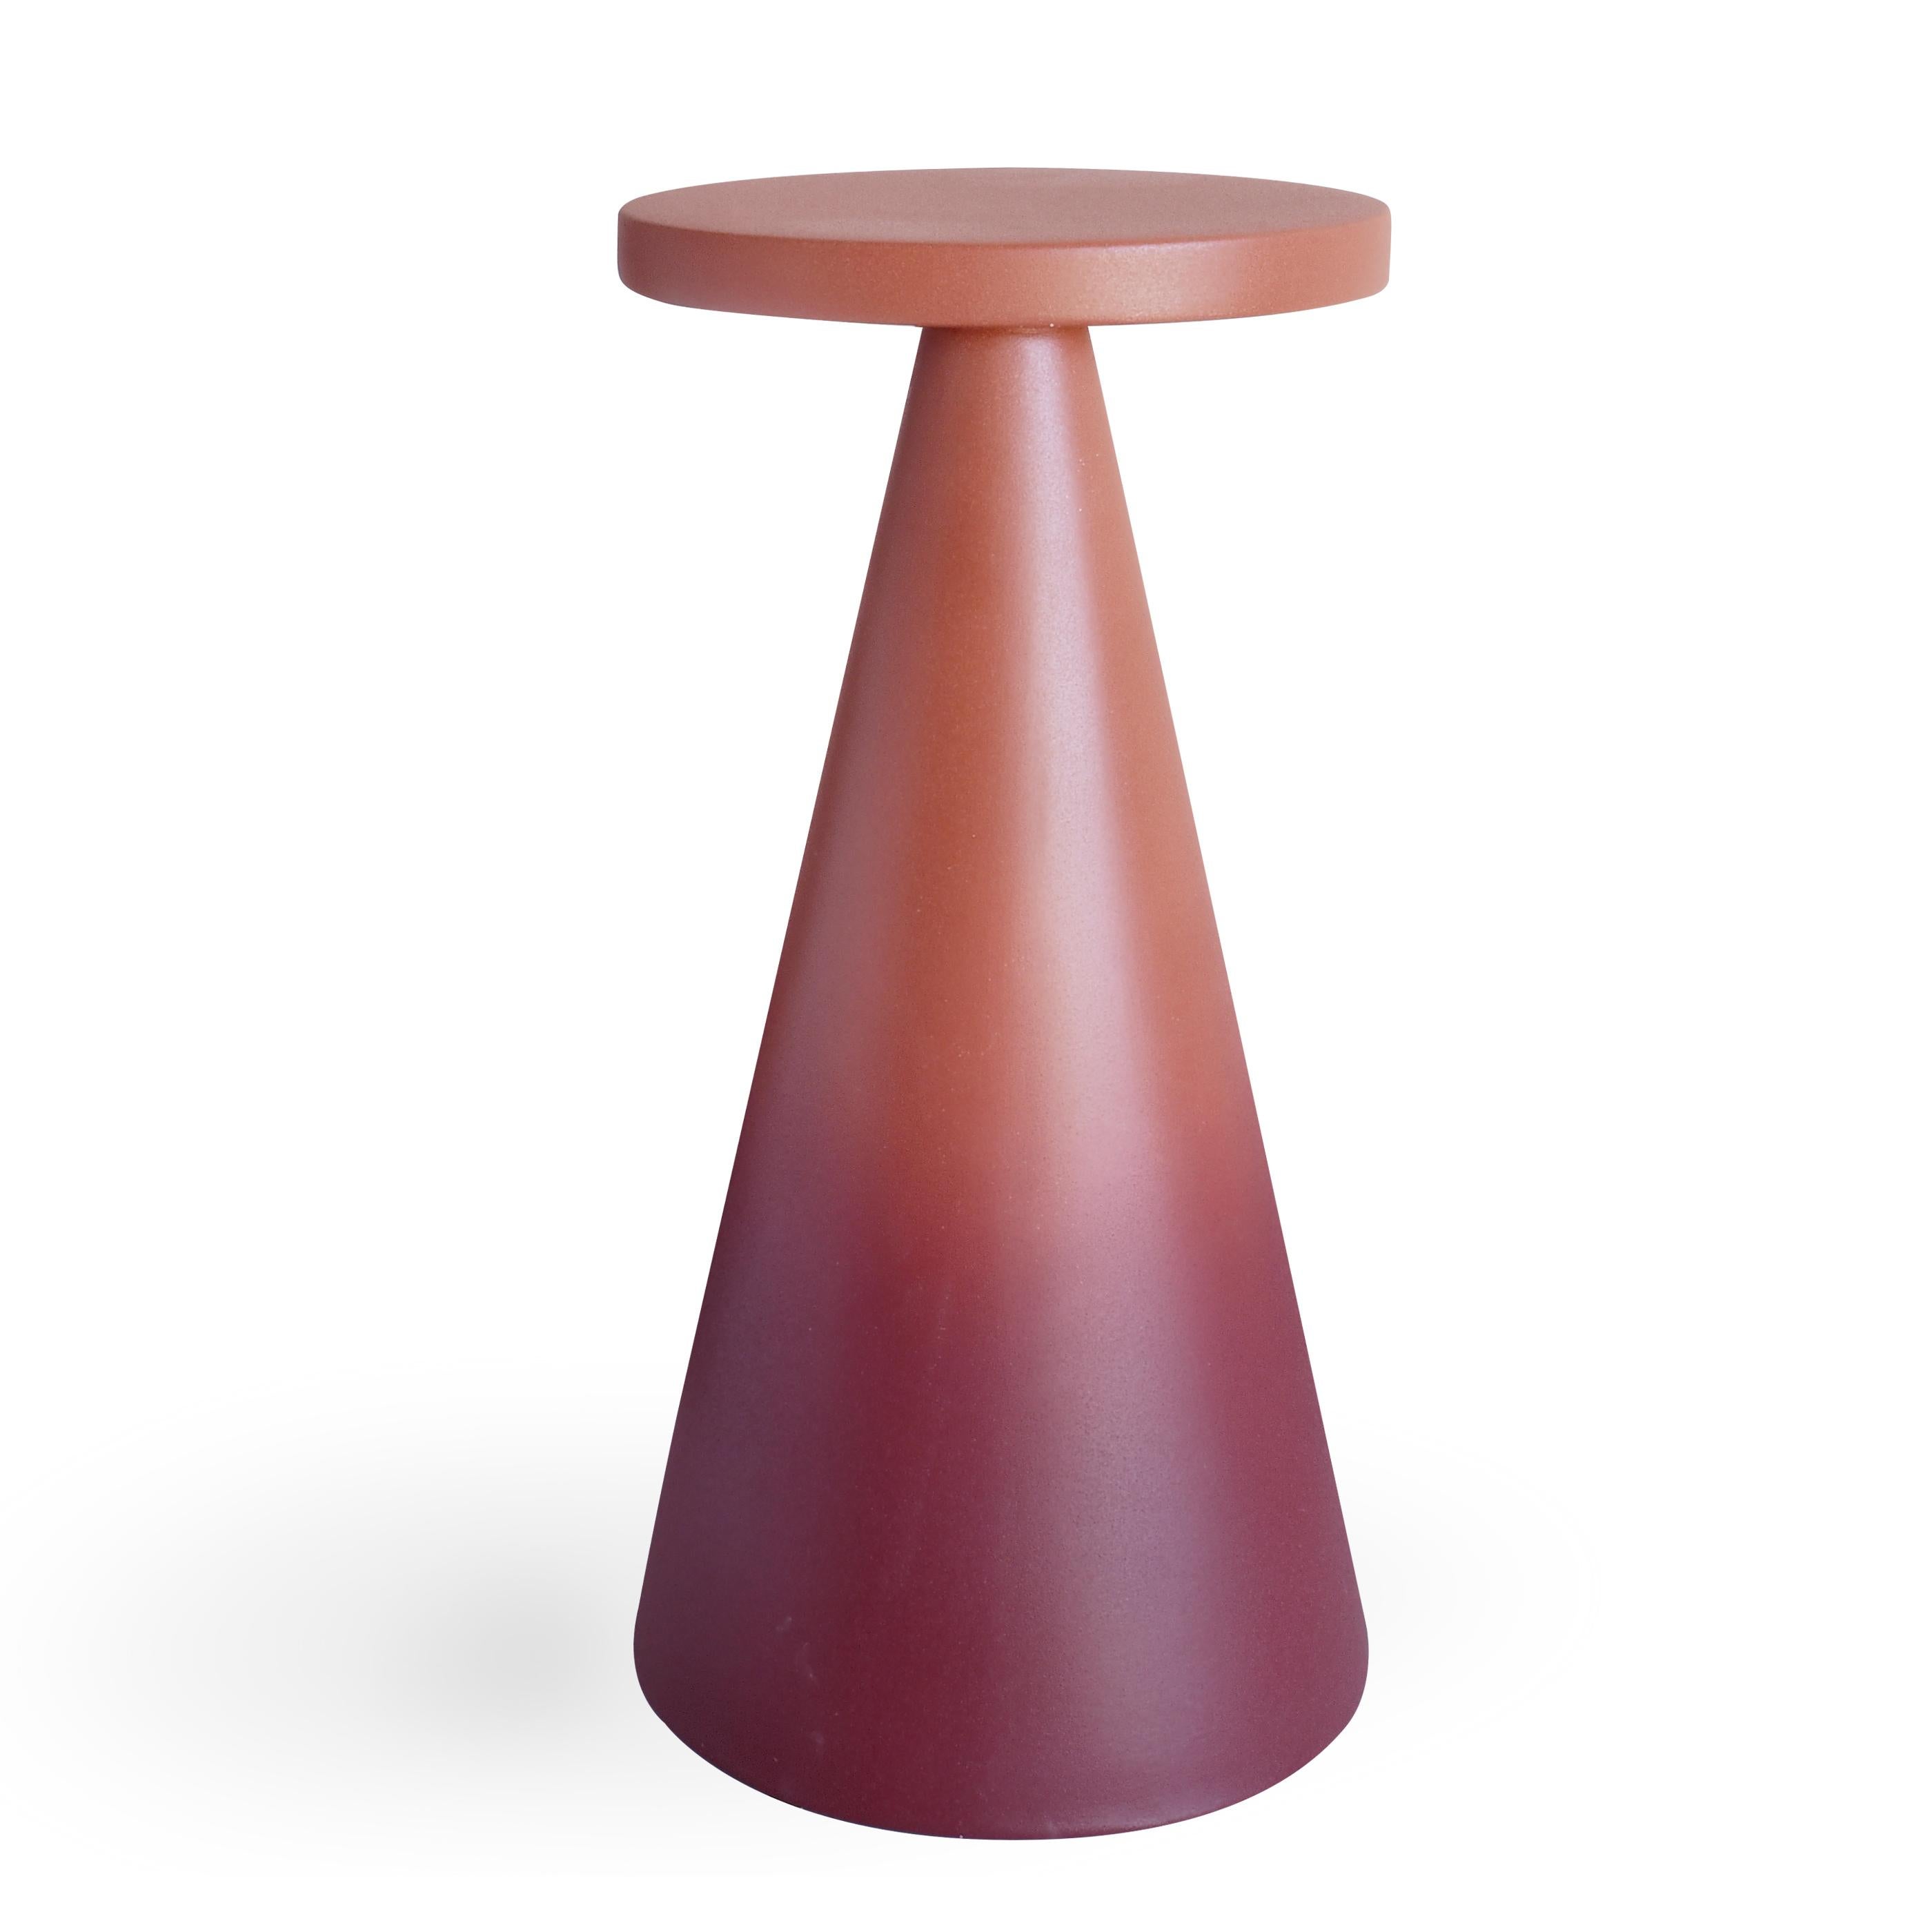 Isola/ Ceramic Conic Side Table/ Cotto, Designed by Cara/Davide for Portego In New Condition For Sale In Stienta, IT